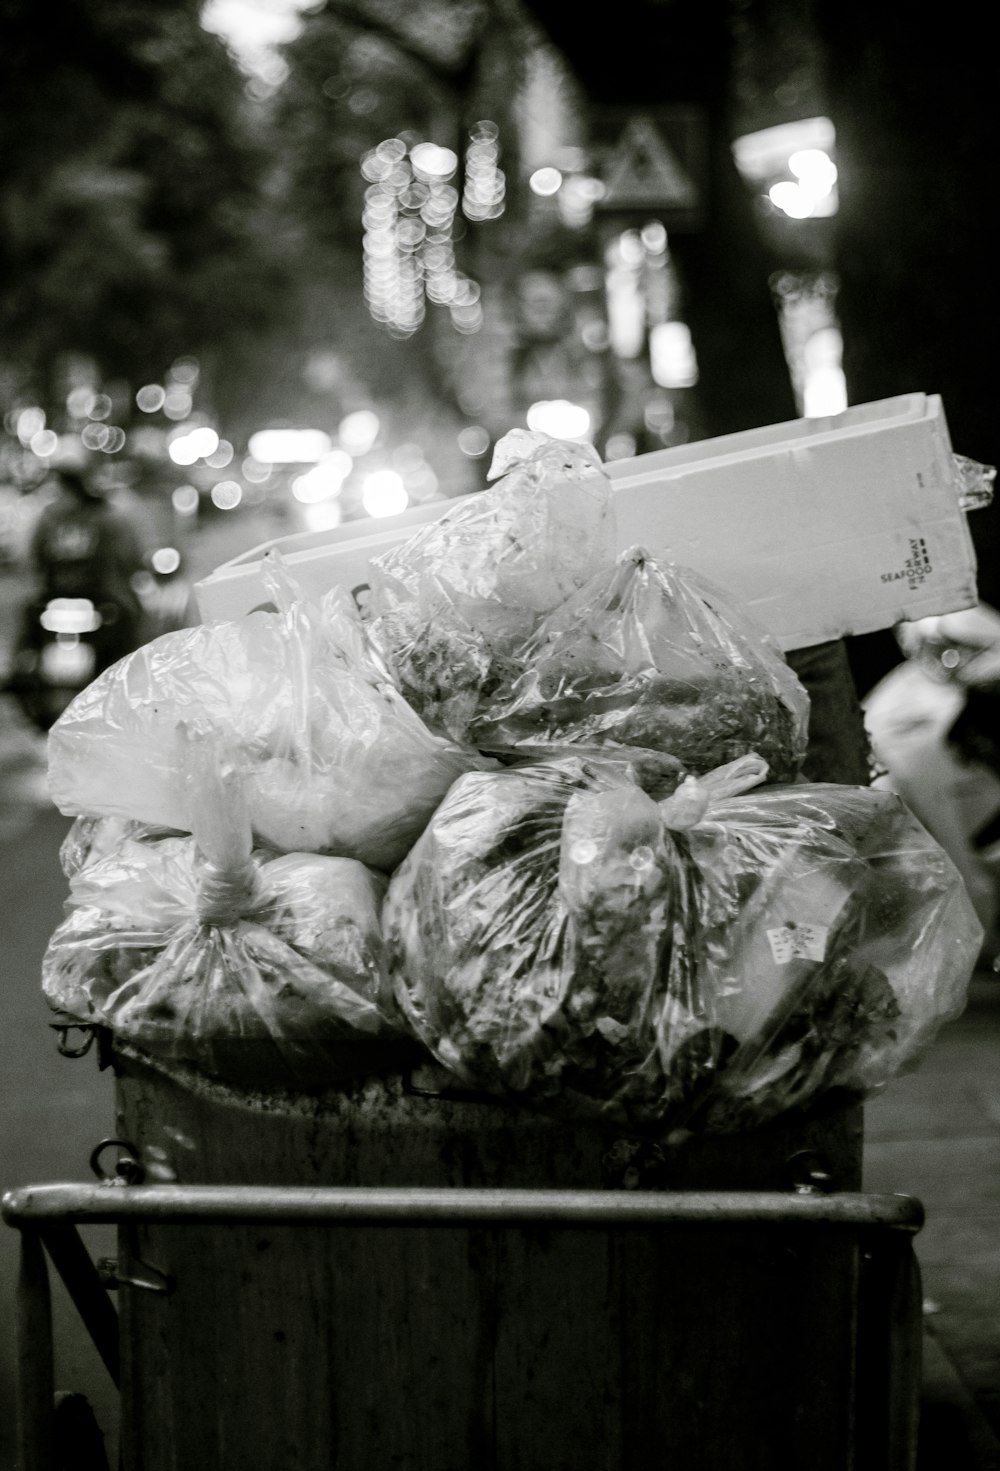 a black and white photo of a trash can filled with bags